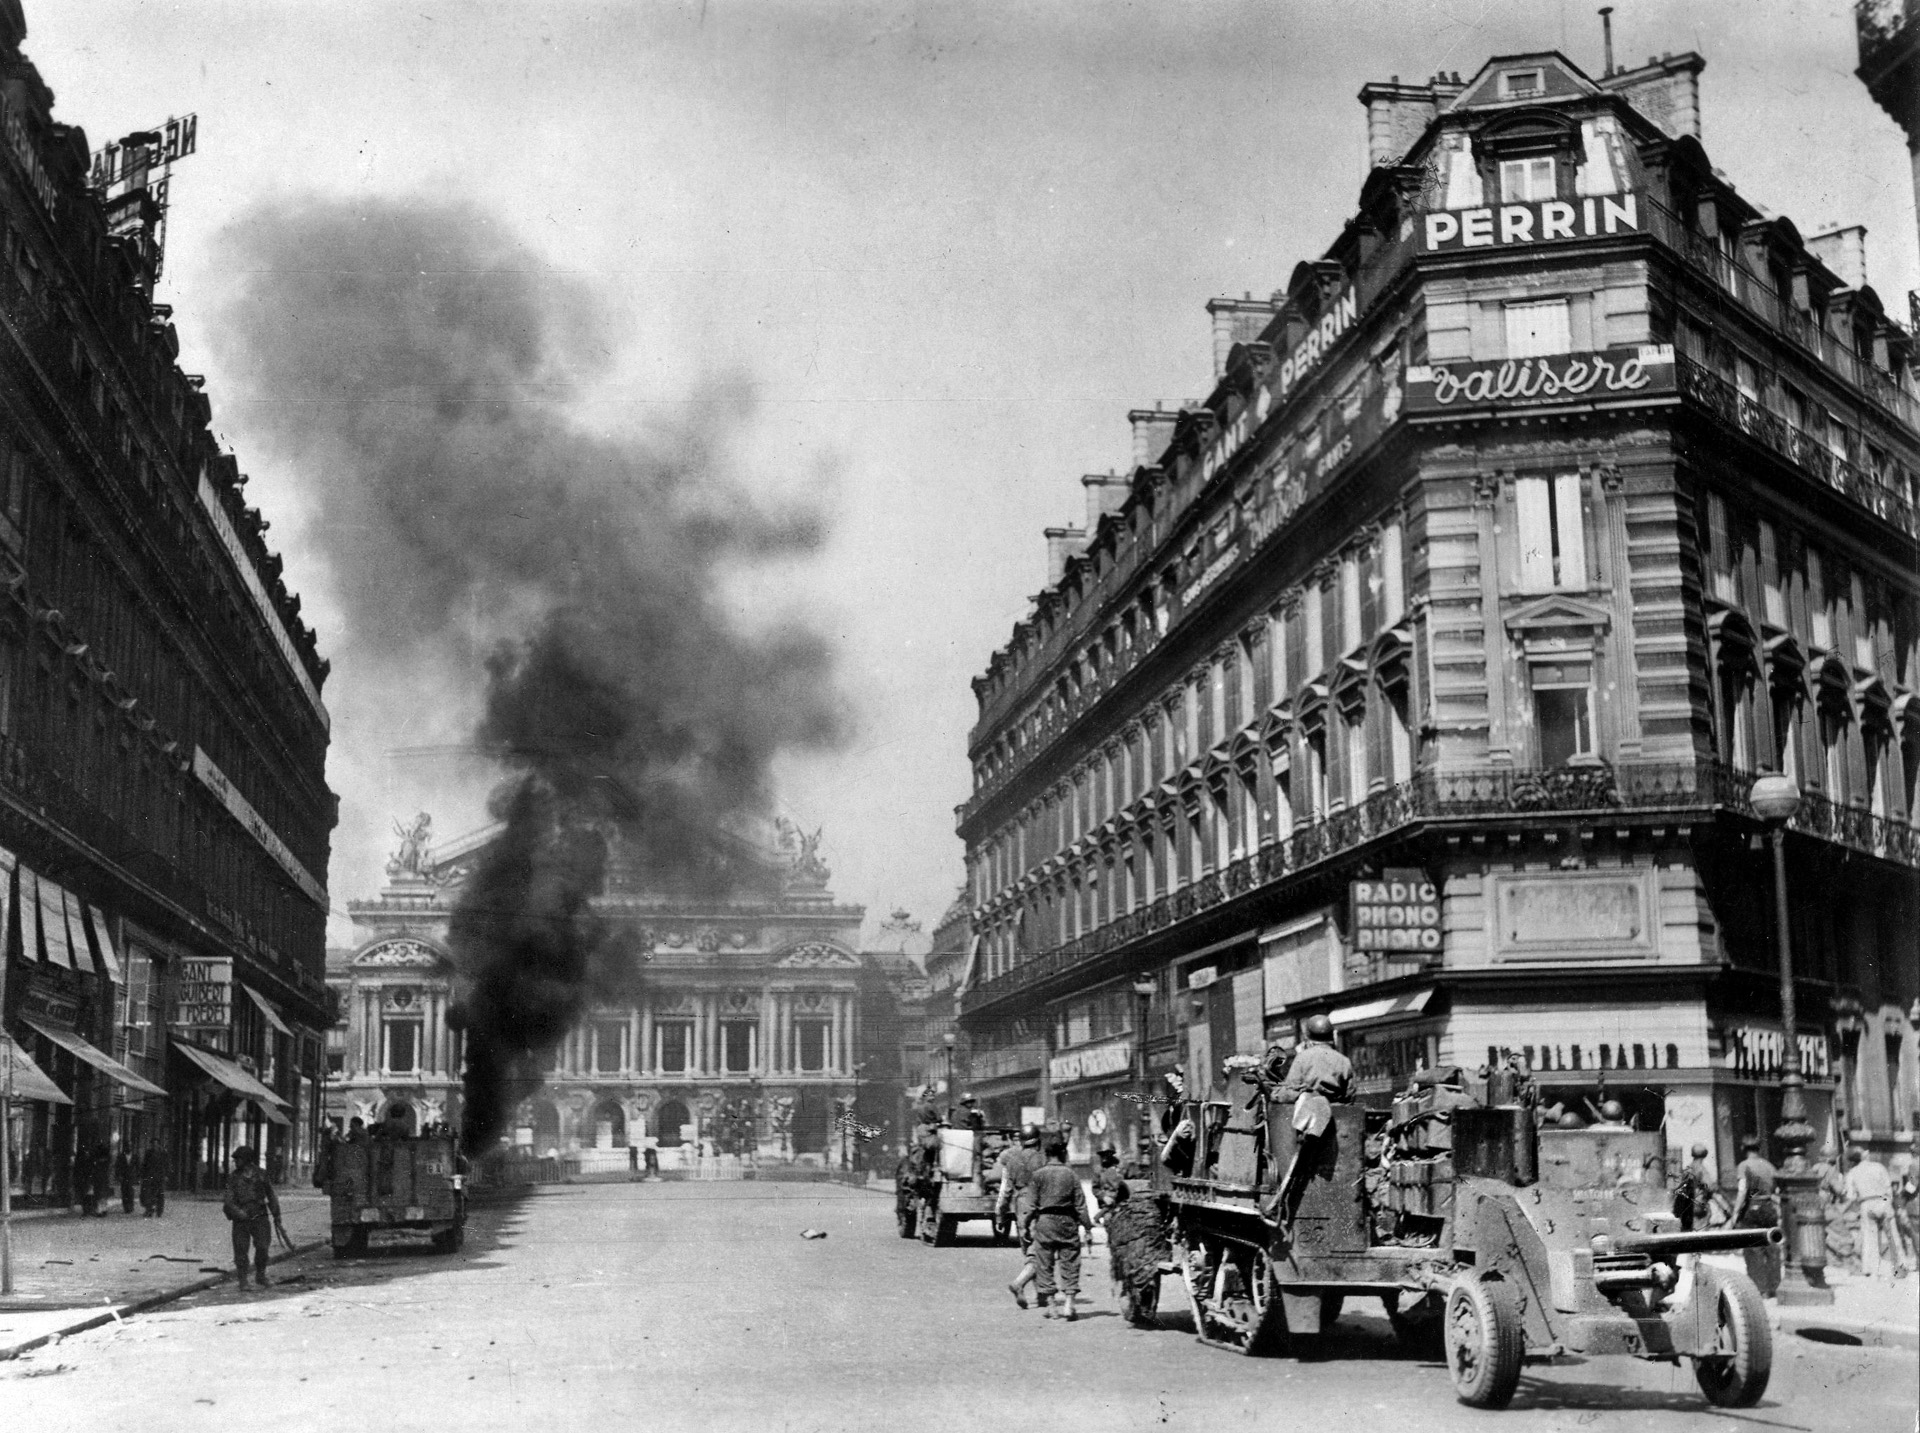  A German tank burns in front of the Paris Opera House after being hit by an anti-tank round. René Champion’s tank was also hit when a grenade was dropped into the open hatch.